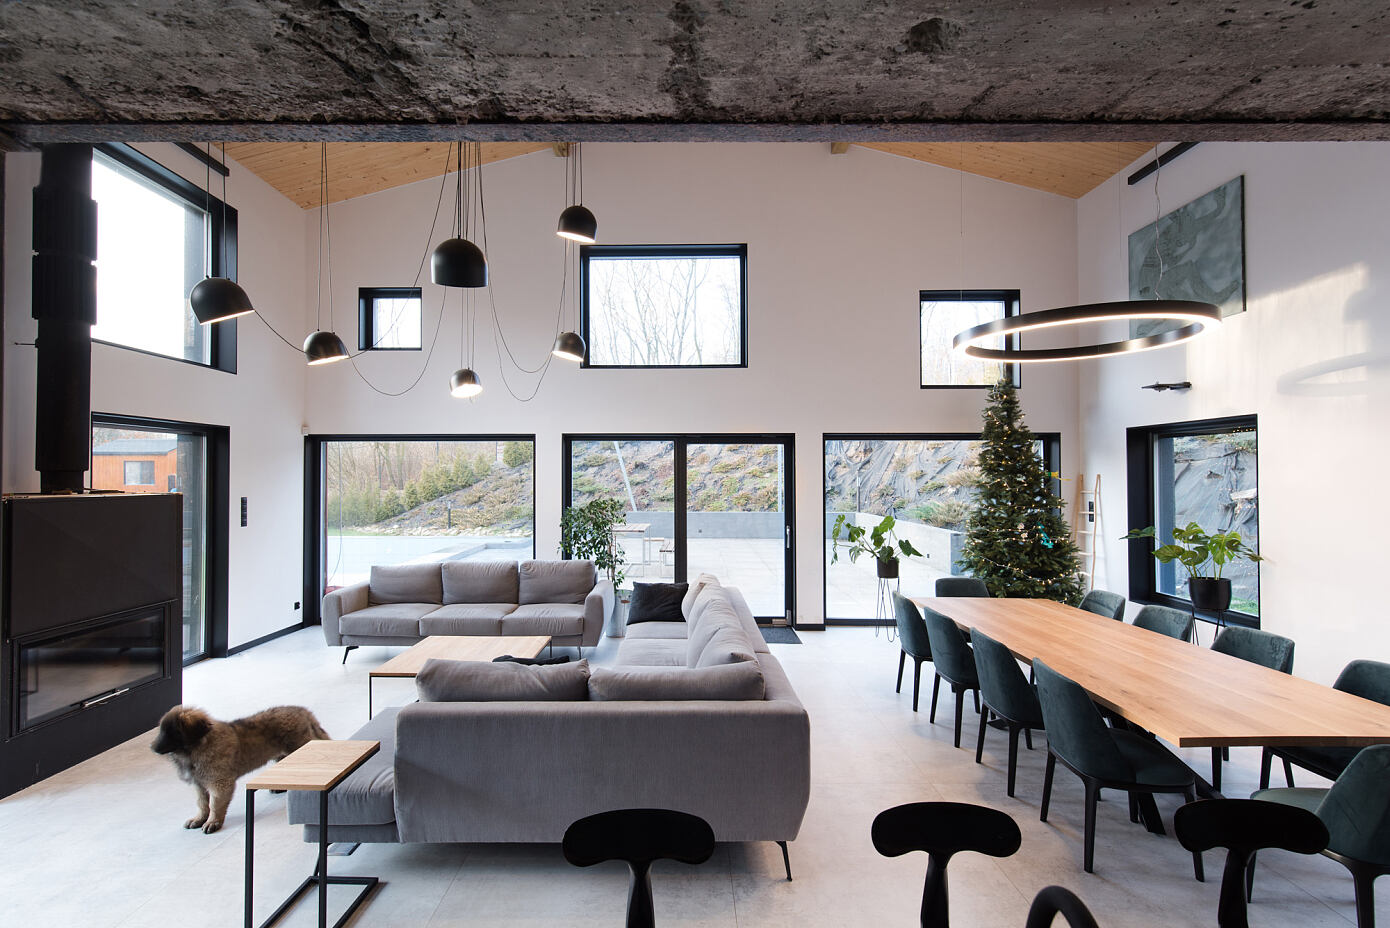 Silesian House by Mode:lina